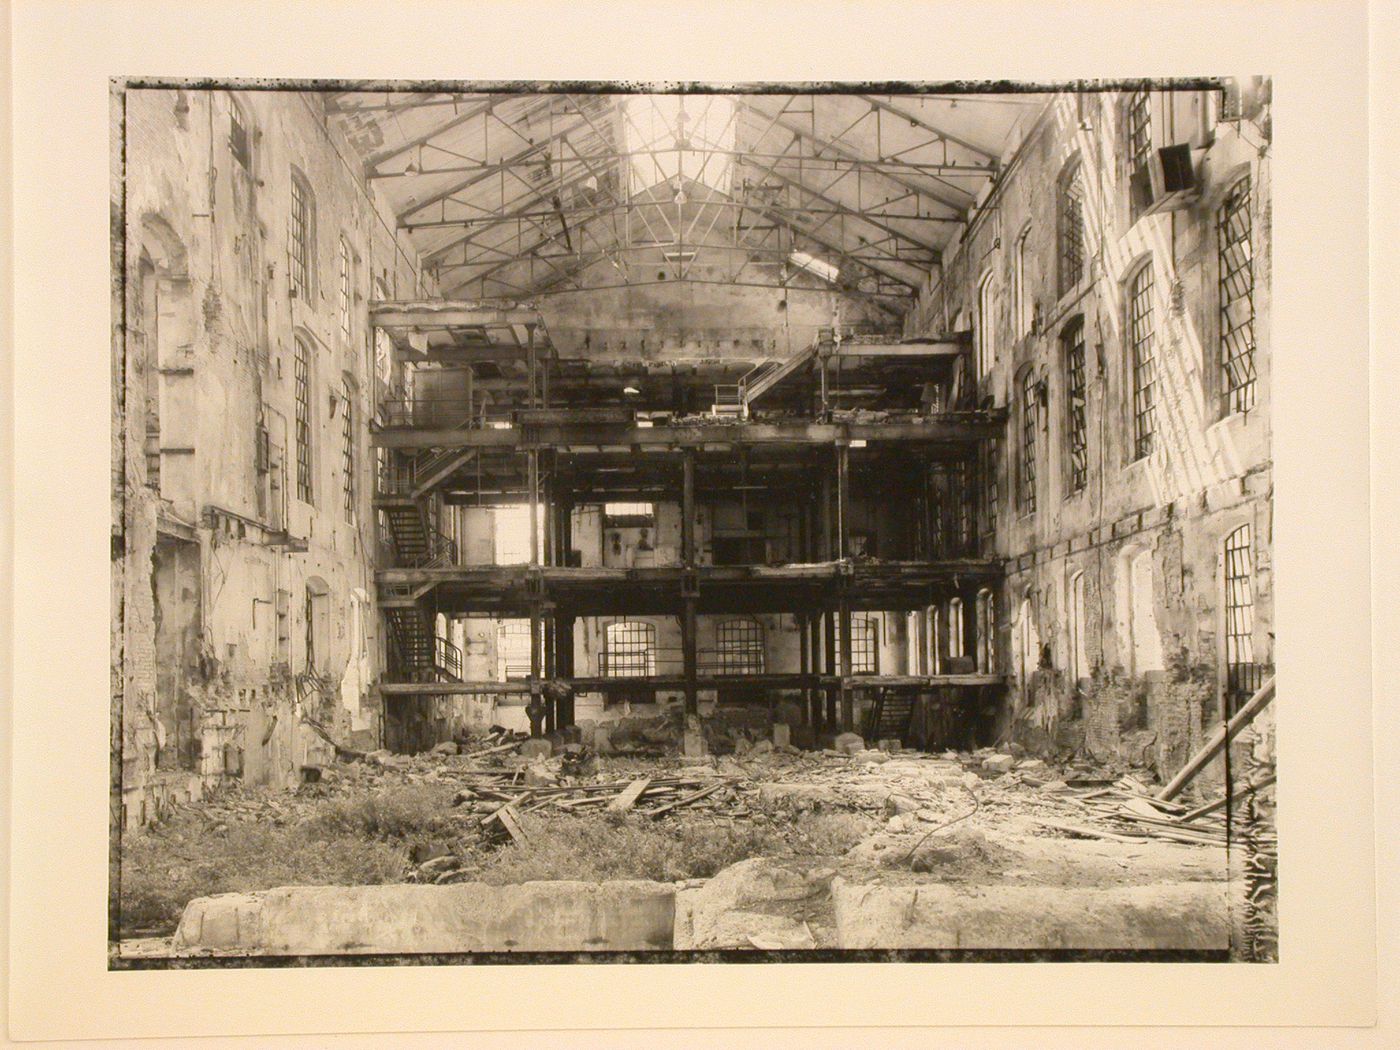 Interior view of factory building ruins in Eridania, Ravenna, Italy